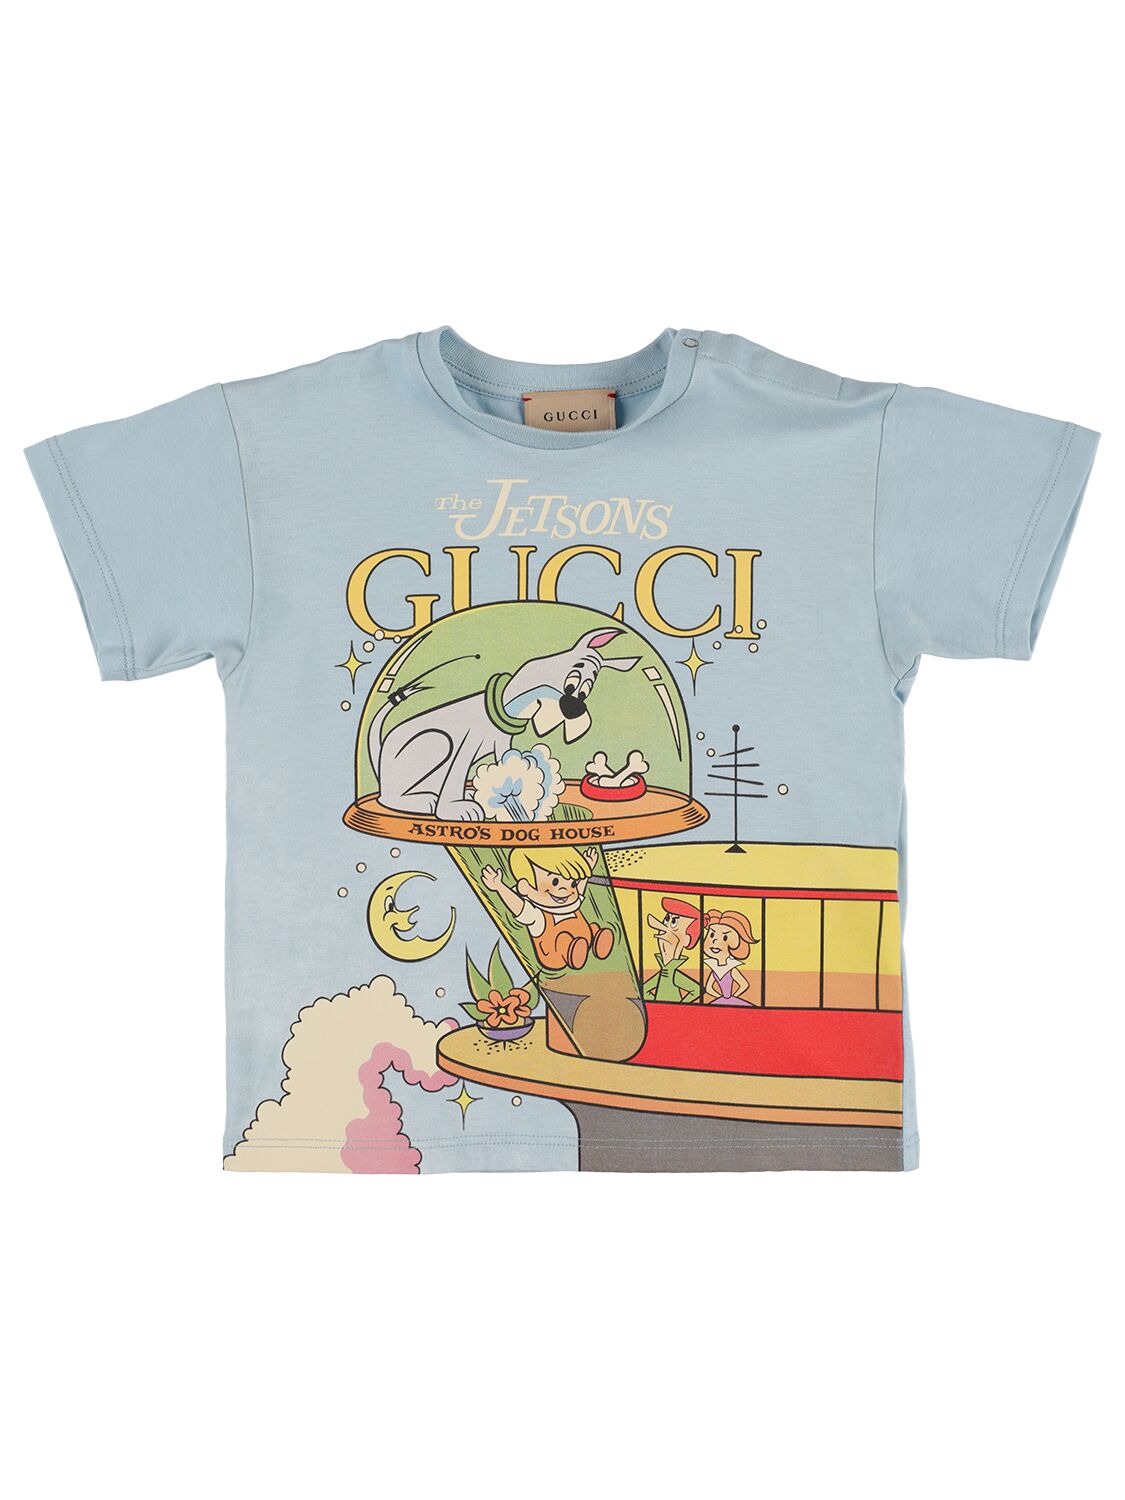 Gucci And The Jetsons Cotton T-shirt